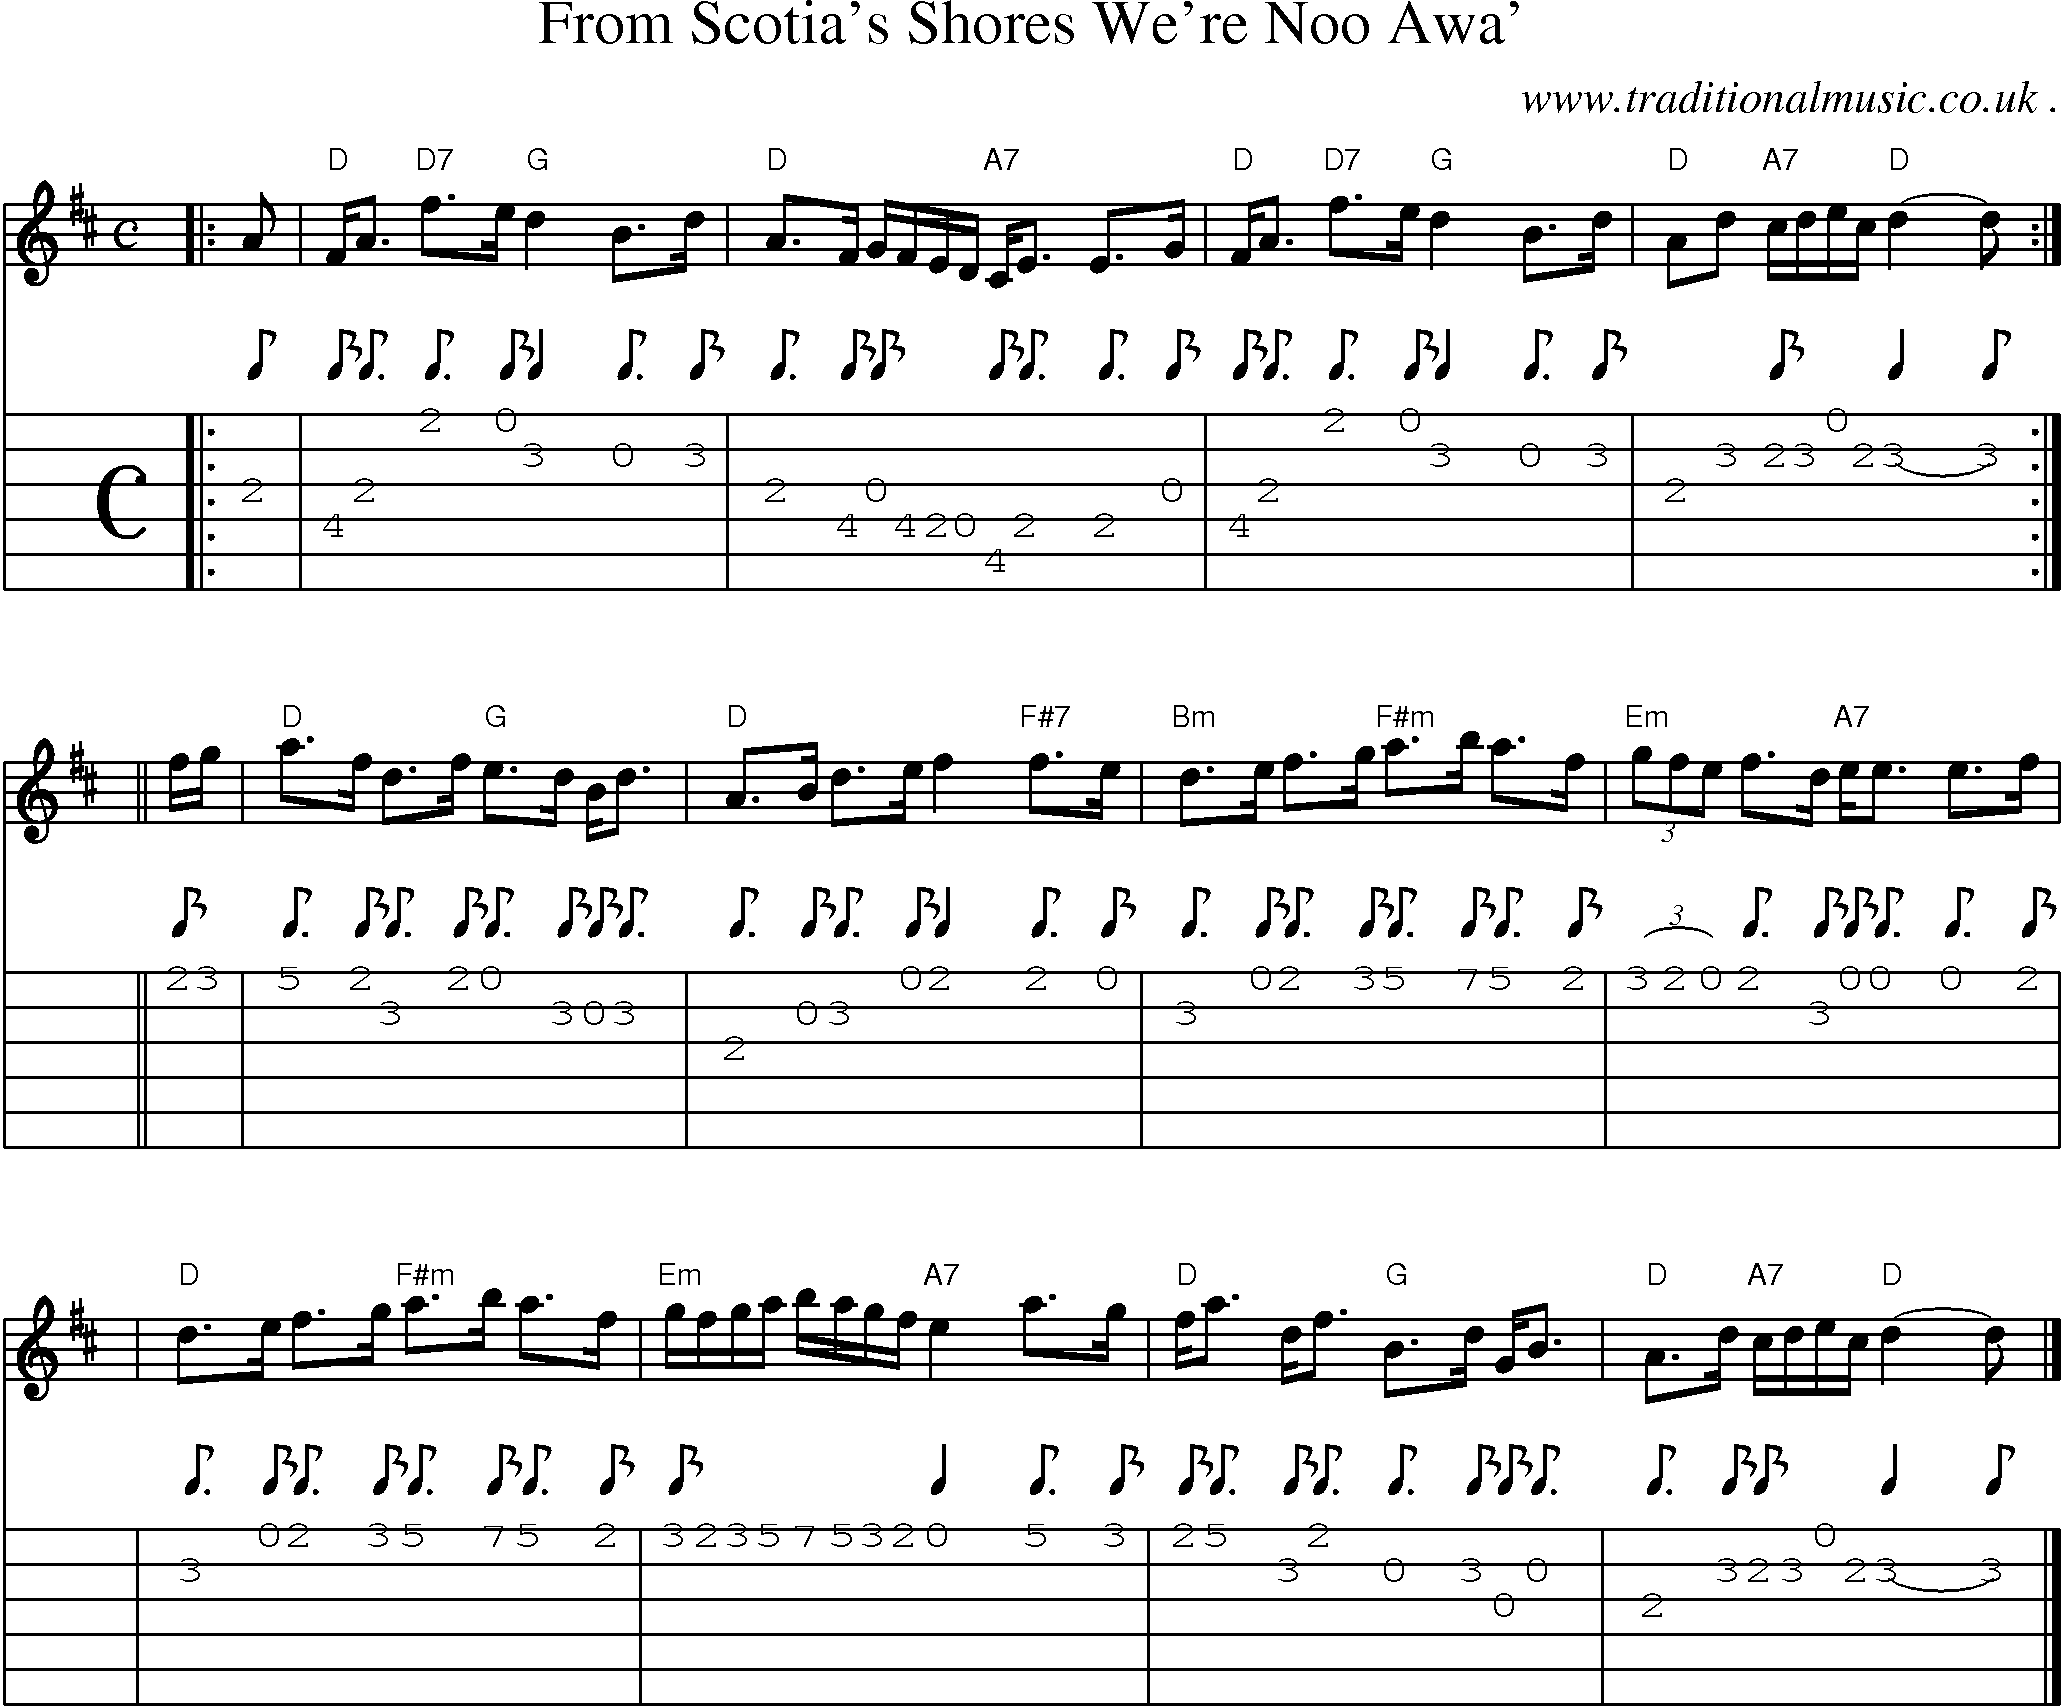 Sheet-music  score, Chords and Guitar Tabs for From Scotias Shores Were Noo Awa